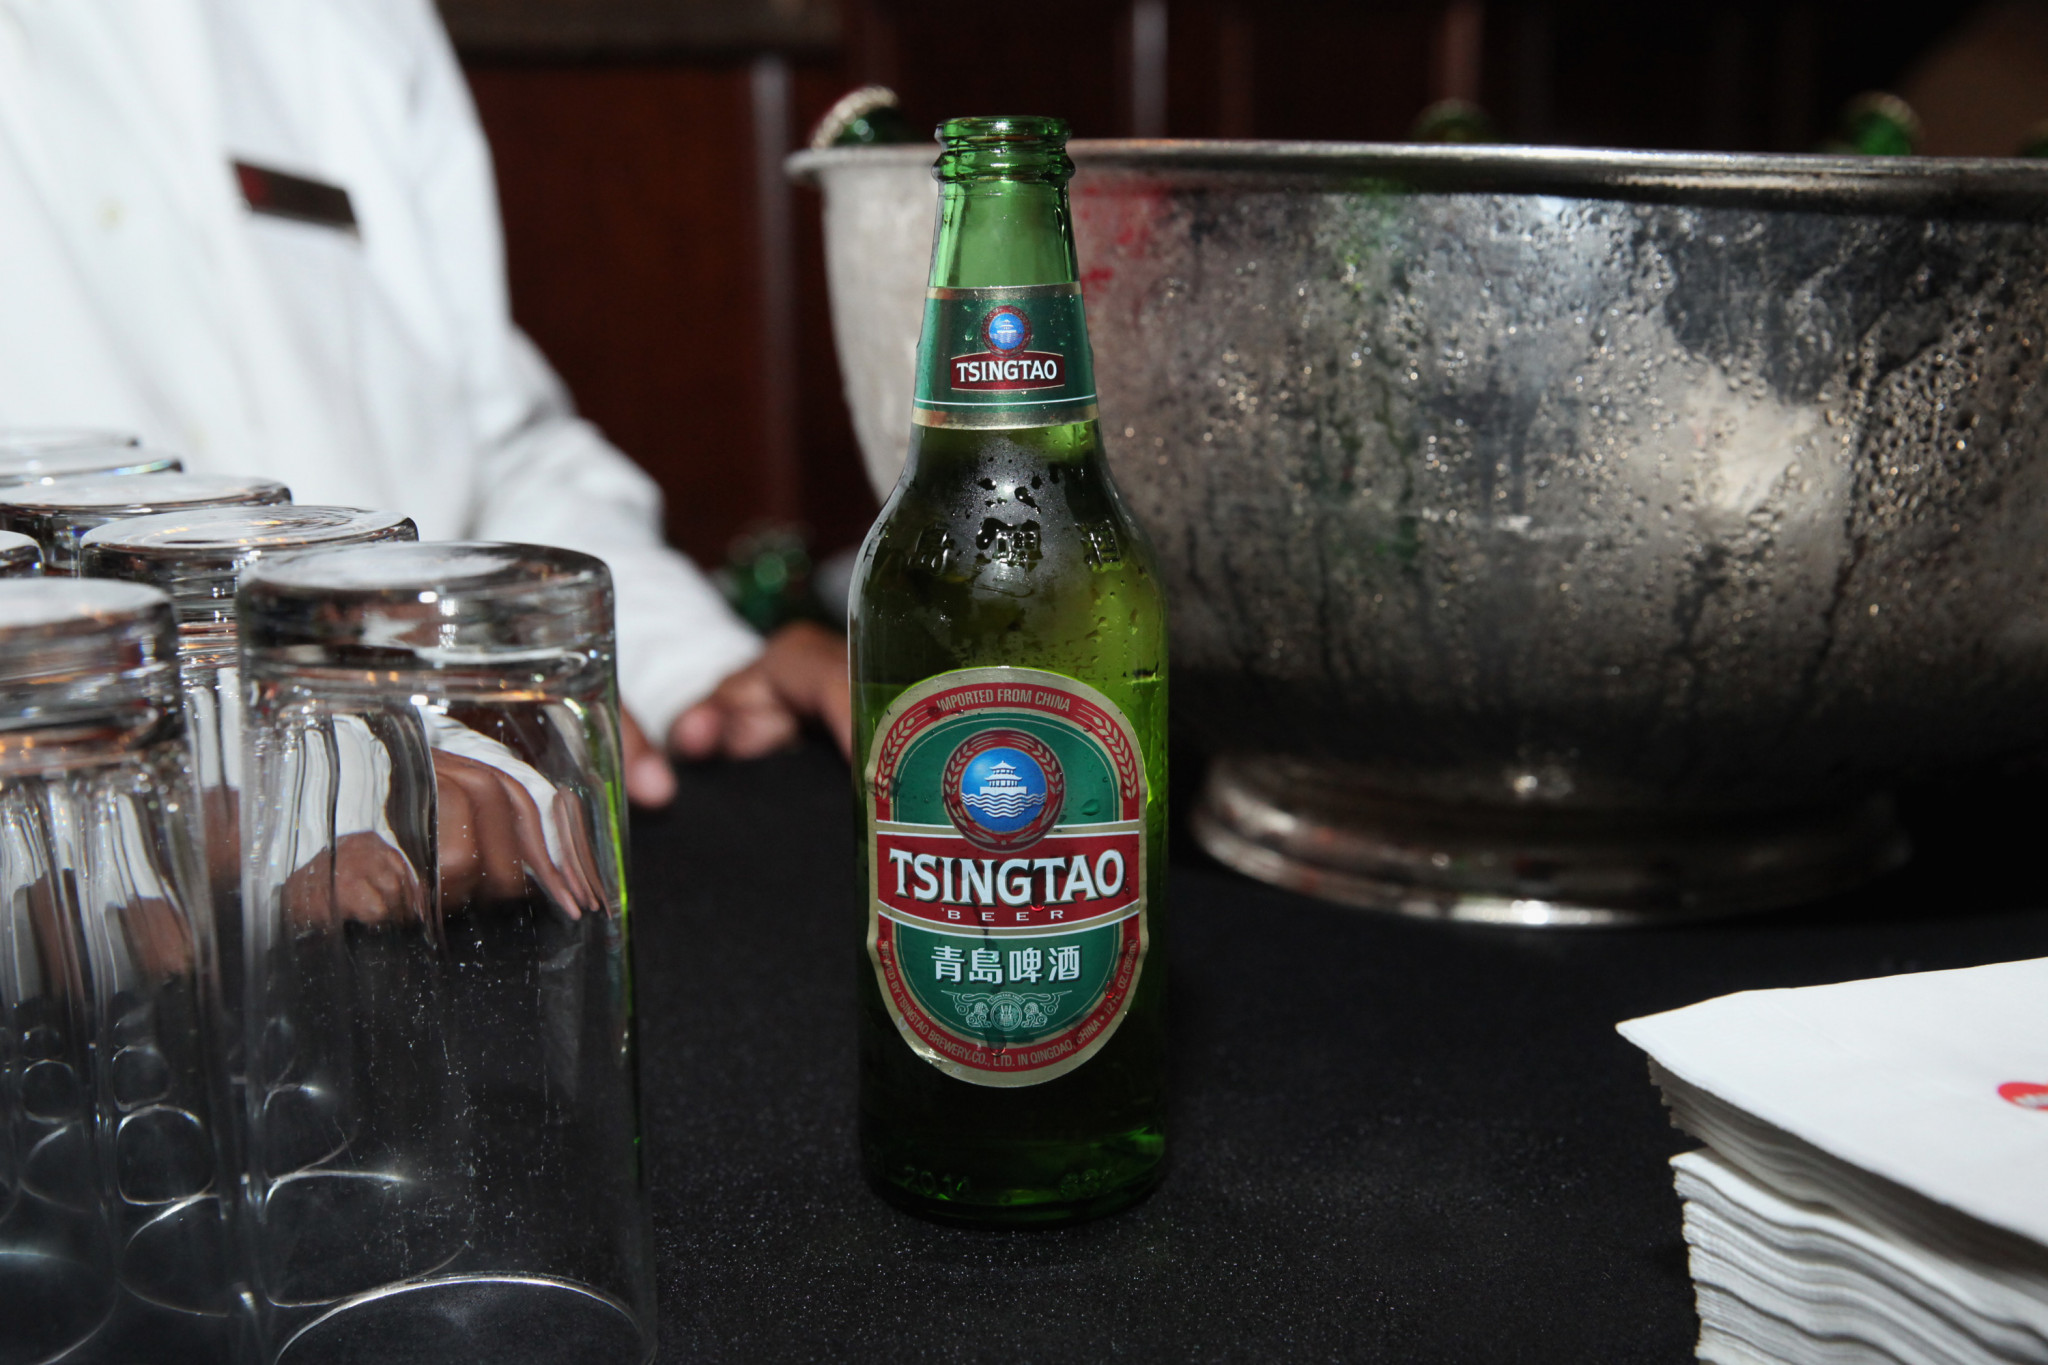 Tsingtao and Yanjing have been named as the official beers of the 2022 Winter Olympic and Paralympic Games ©Getty Images